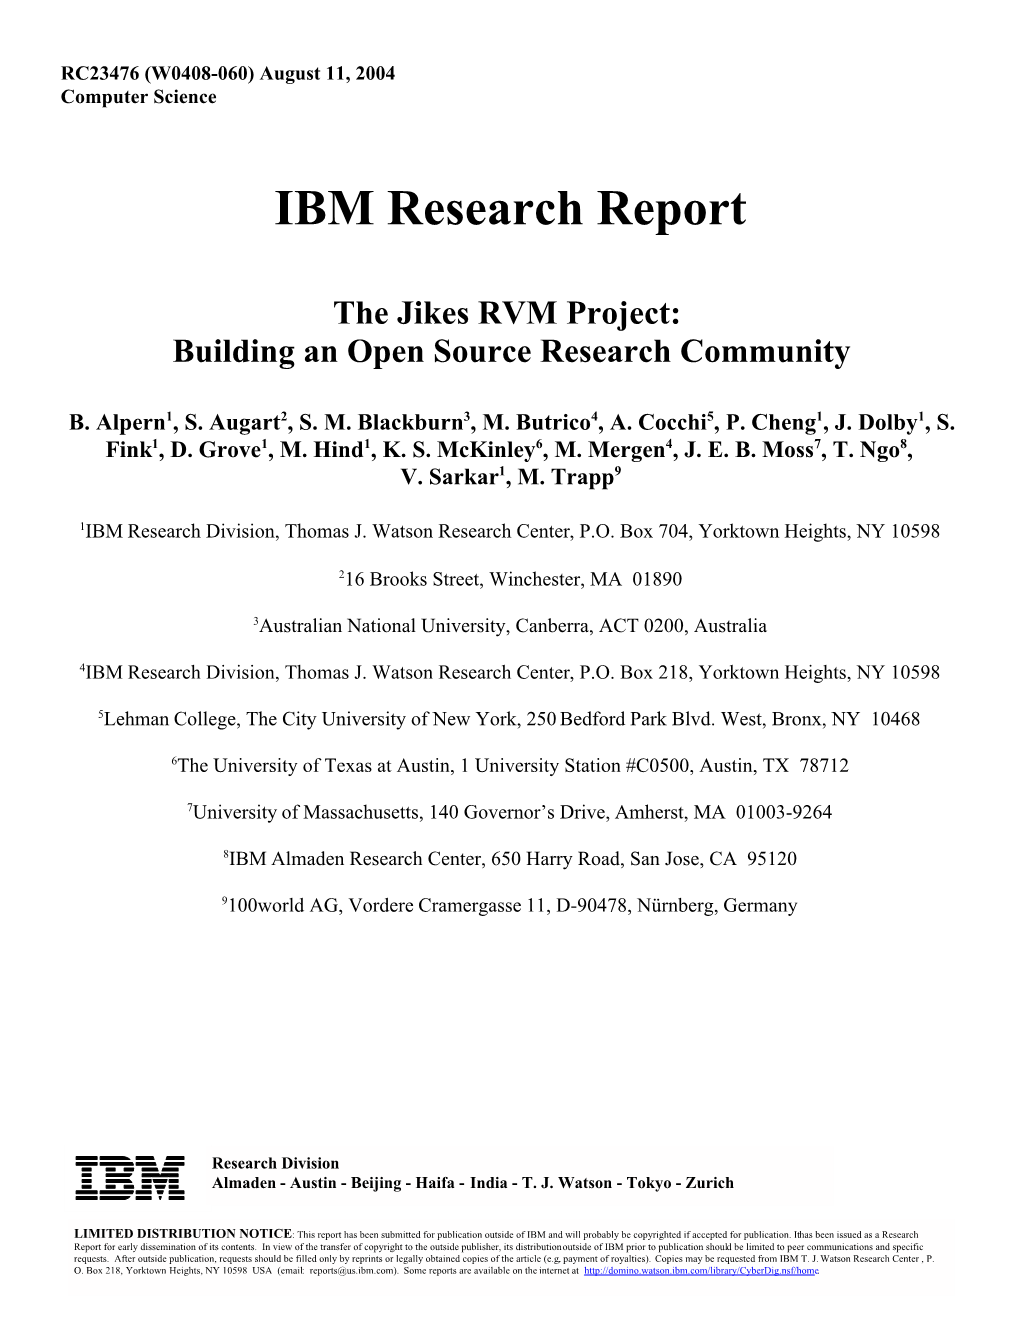 IBM Research Report the Jikes RVM Project